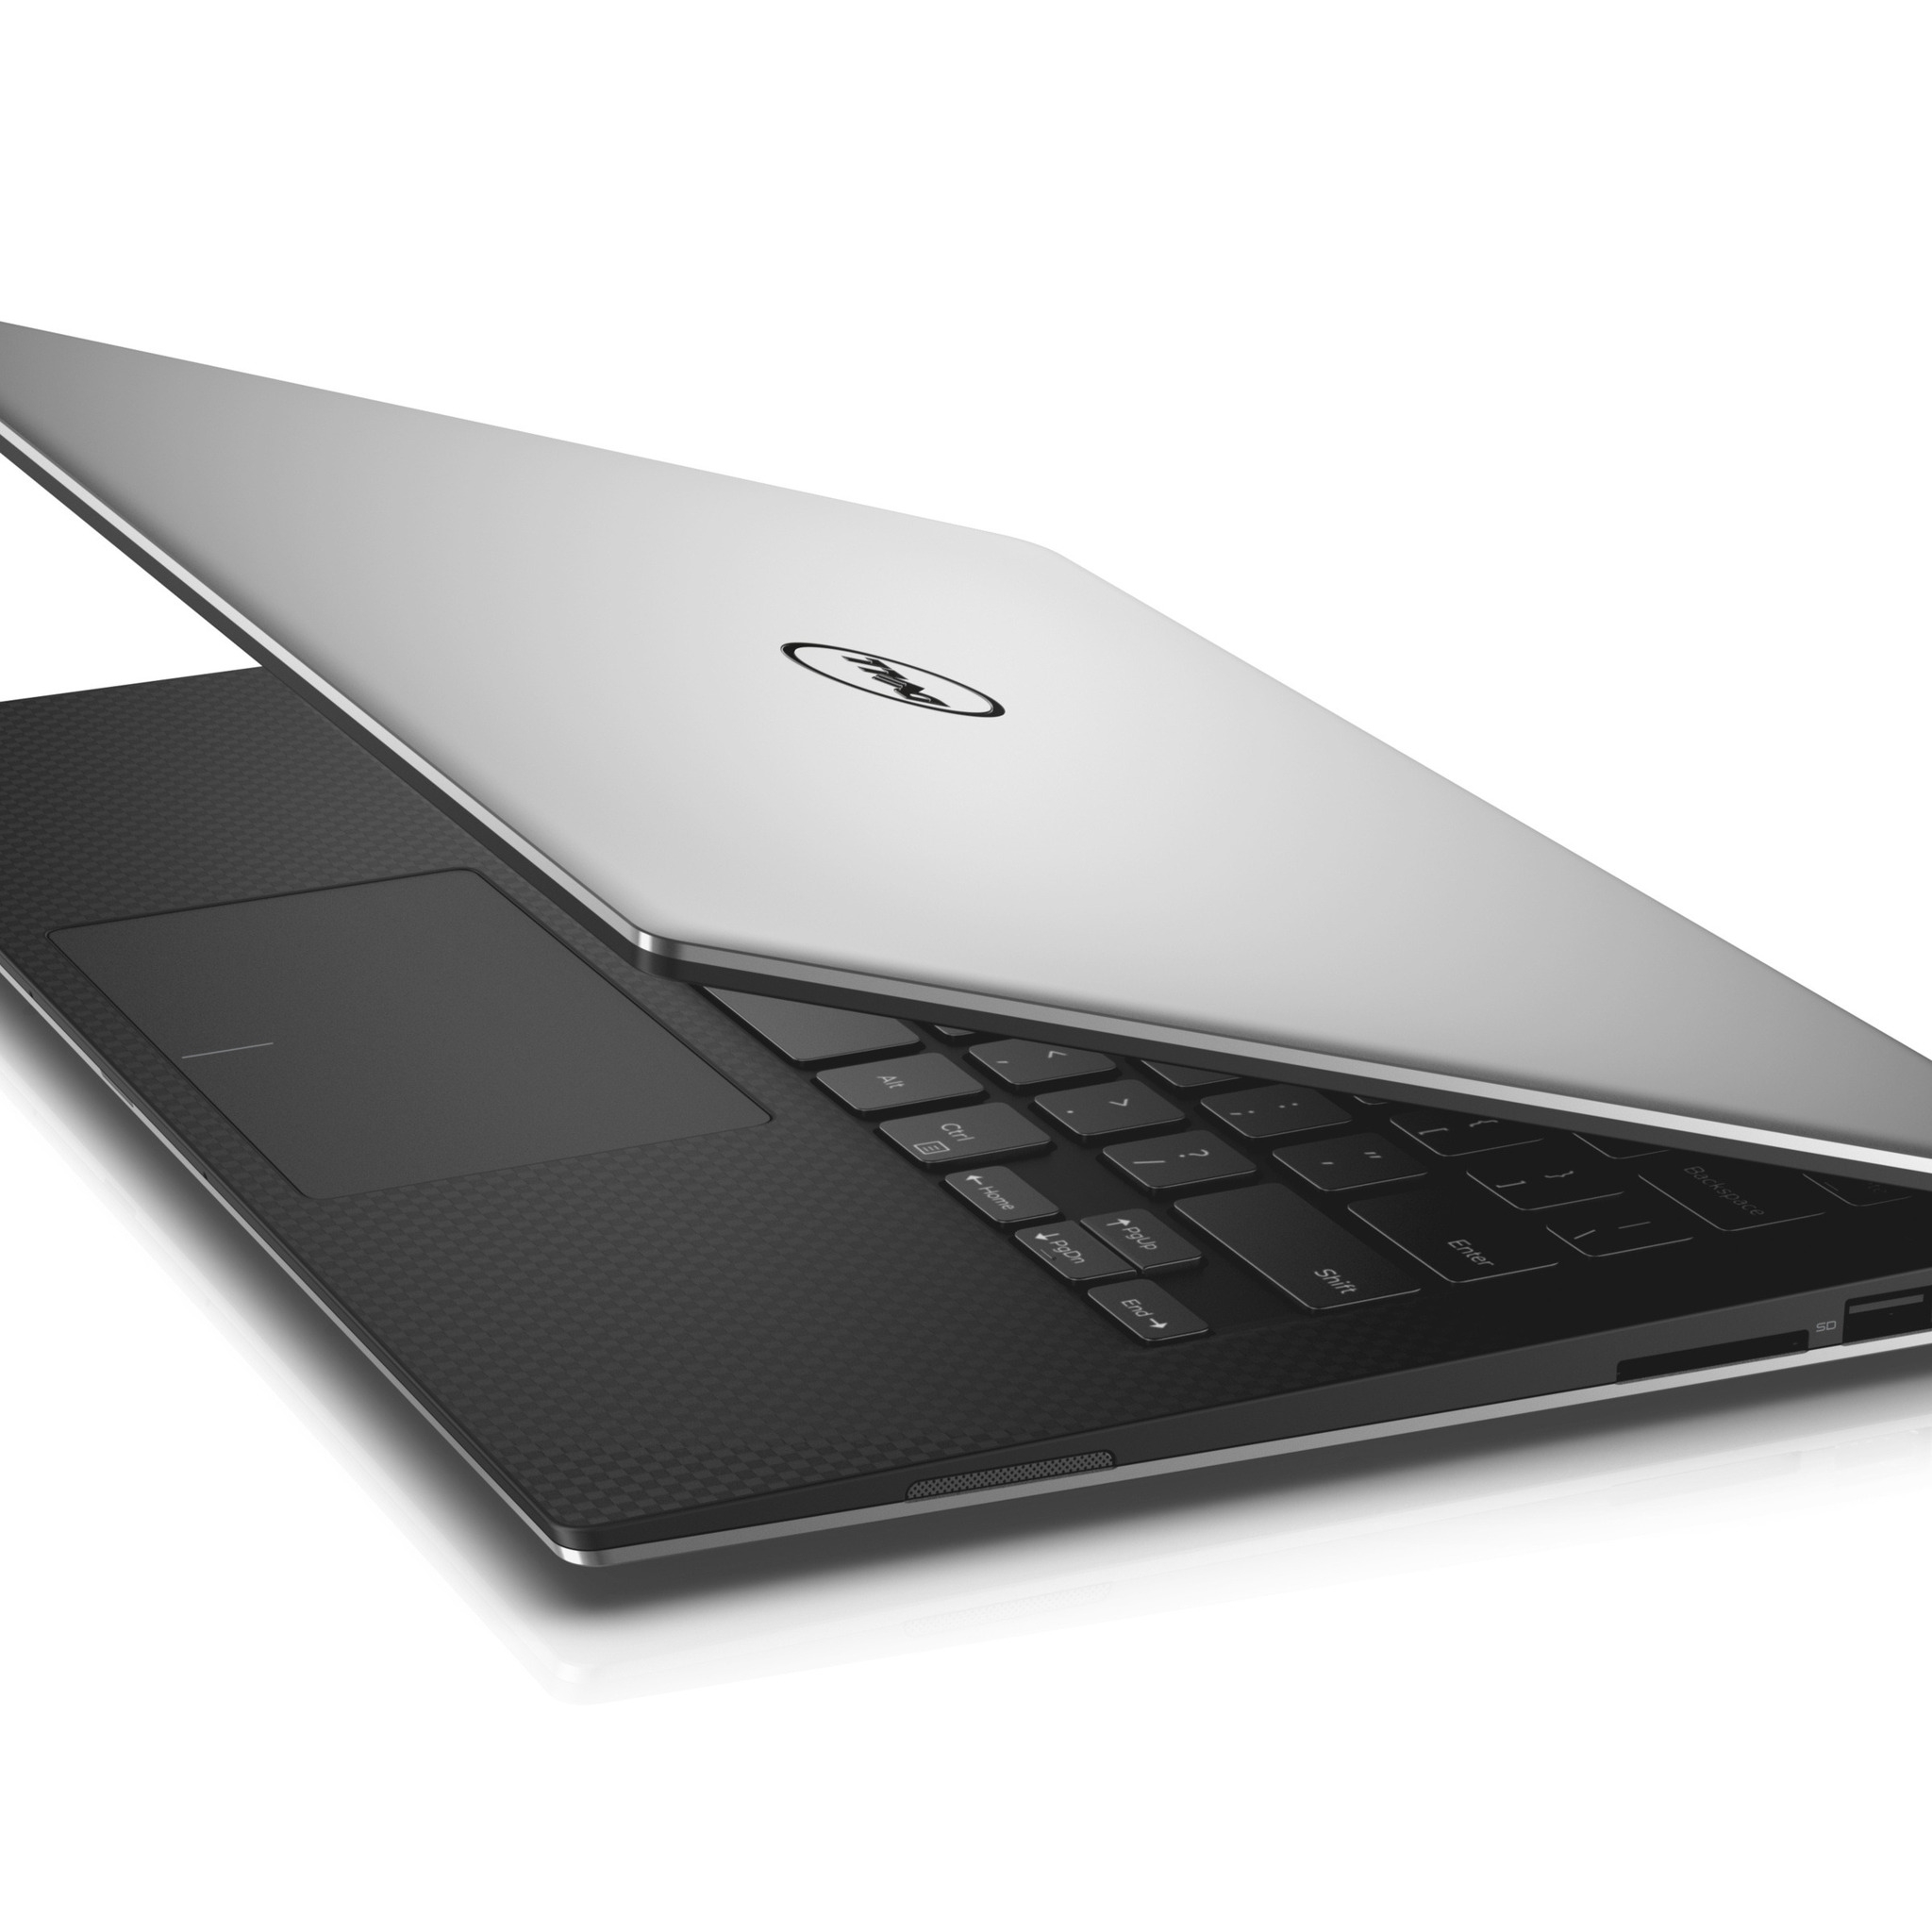 New Dell XPS 13 2015 for 2048 x 2048 New iPad resolution